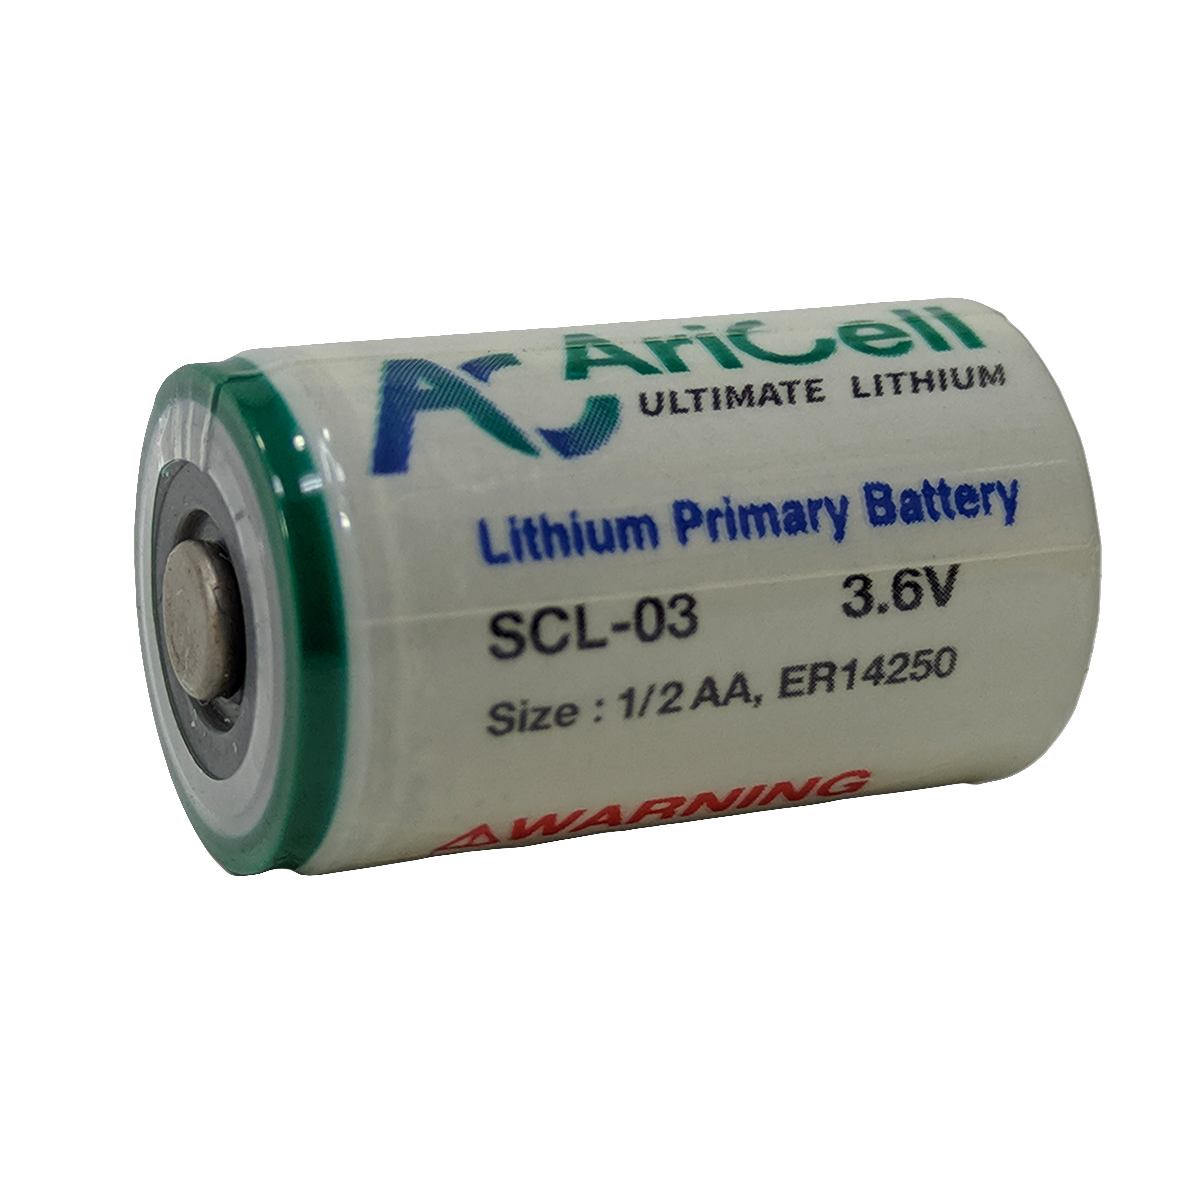 https://www.microbattery.com/pub/media/catalog/product//a/r/aricell_scl-03_2.png